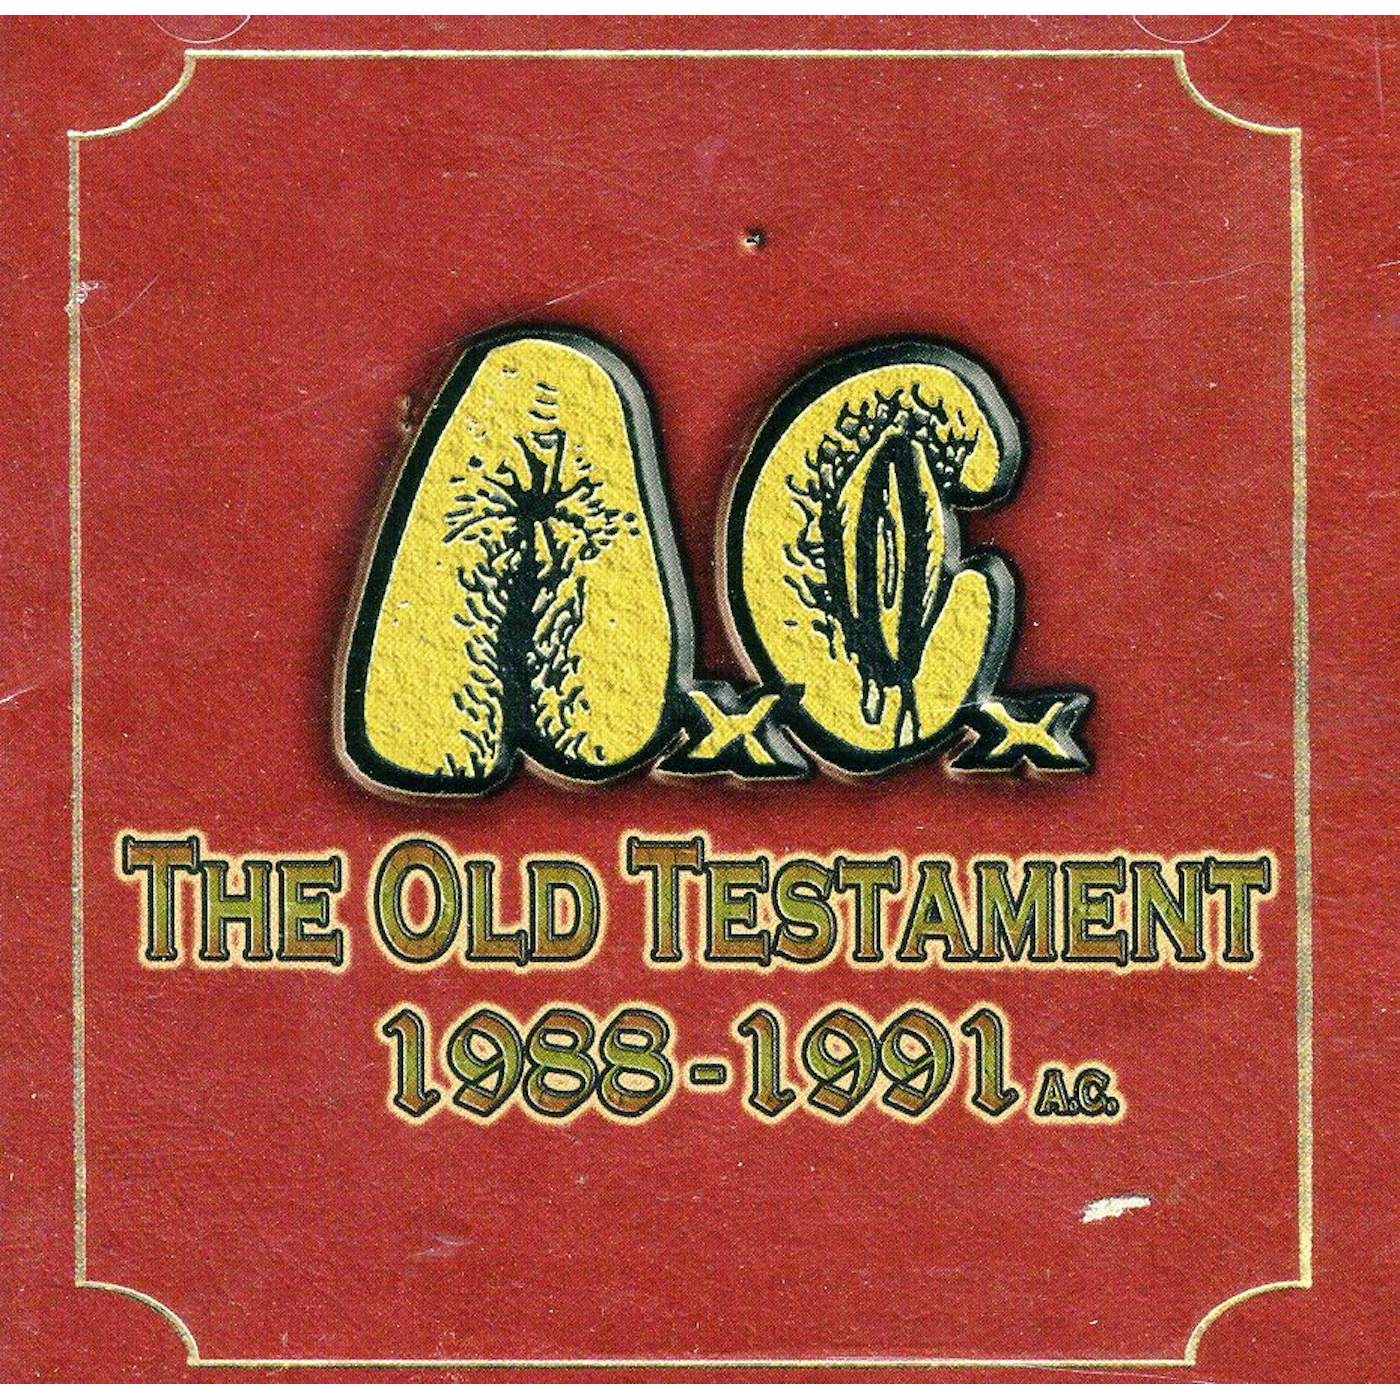 Anal Cunt OLD TESTAMENT 1988-1991 CD